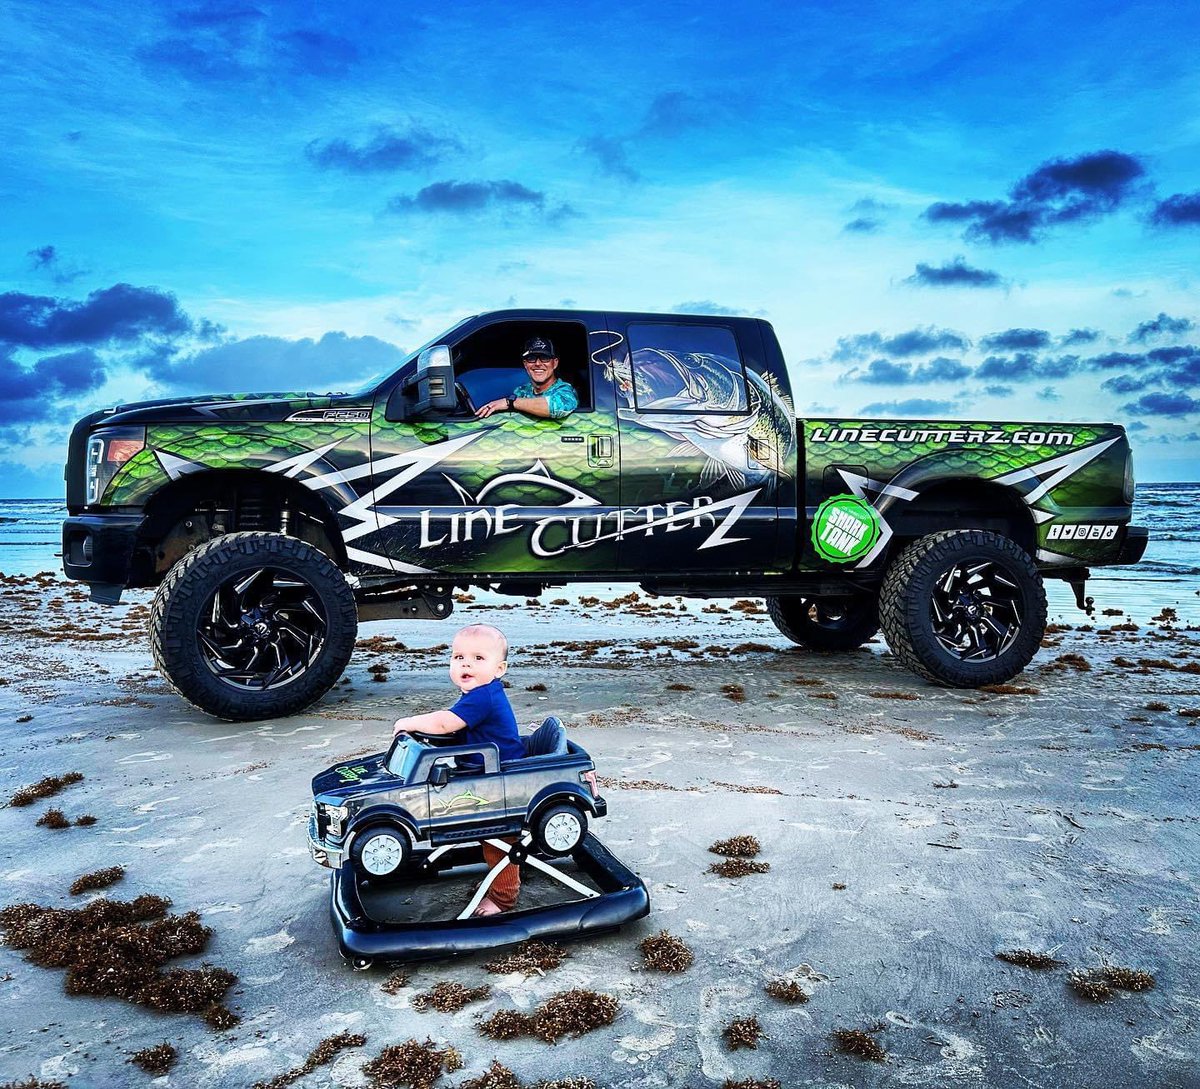 Happy Father’s Day! We hope you get lots of ❤️ today!  #FathersDay2023 #fathersday #likefatherlikeson #linecutterz